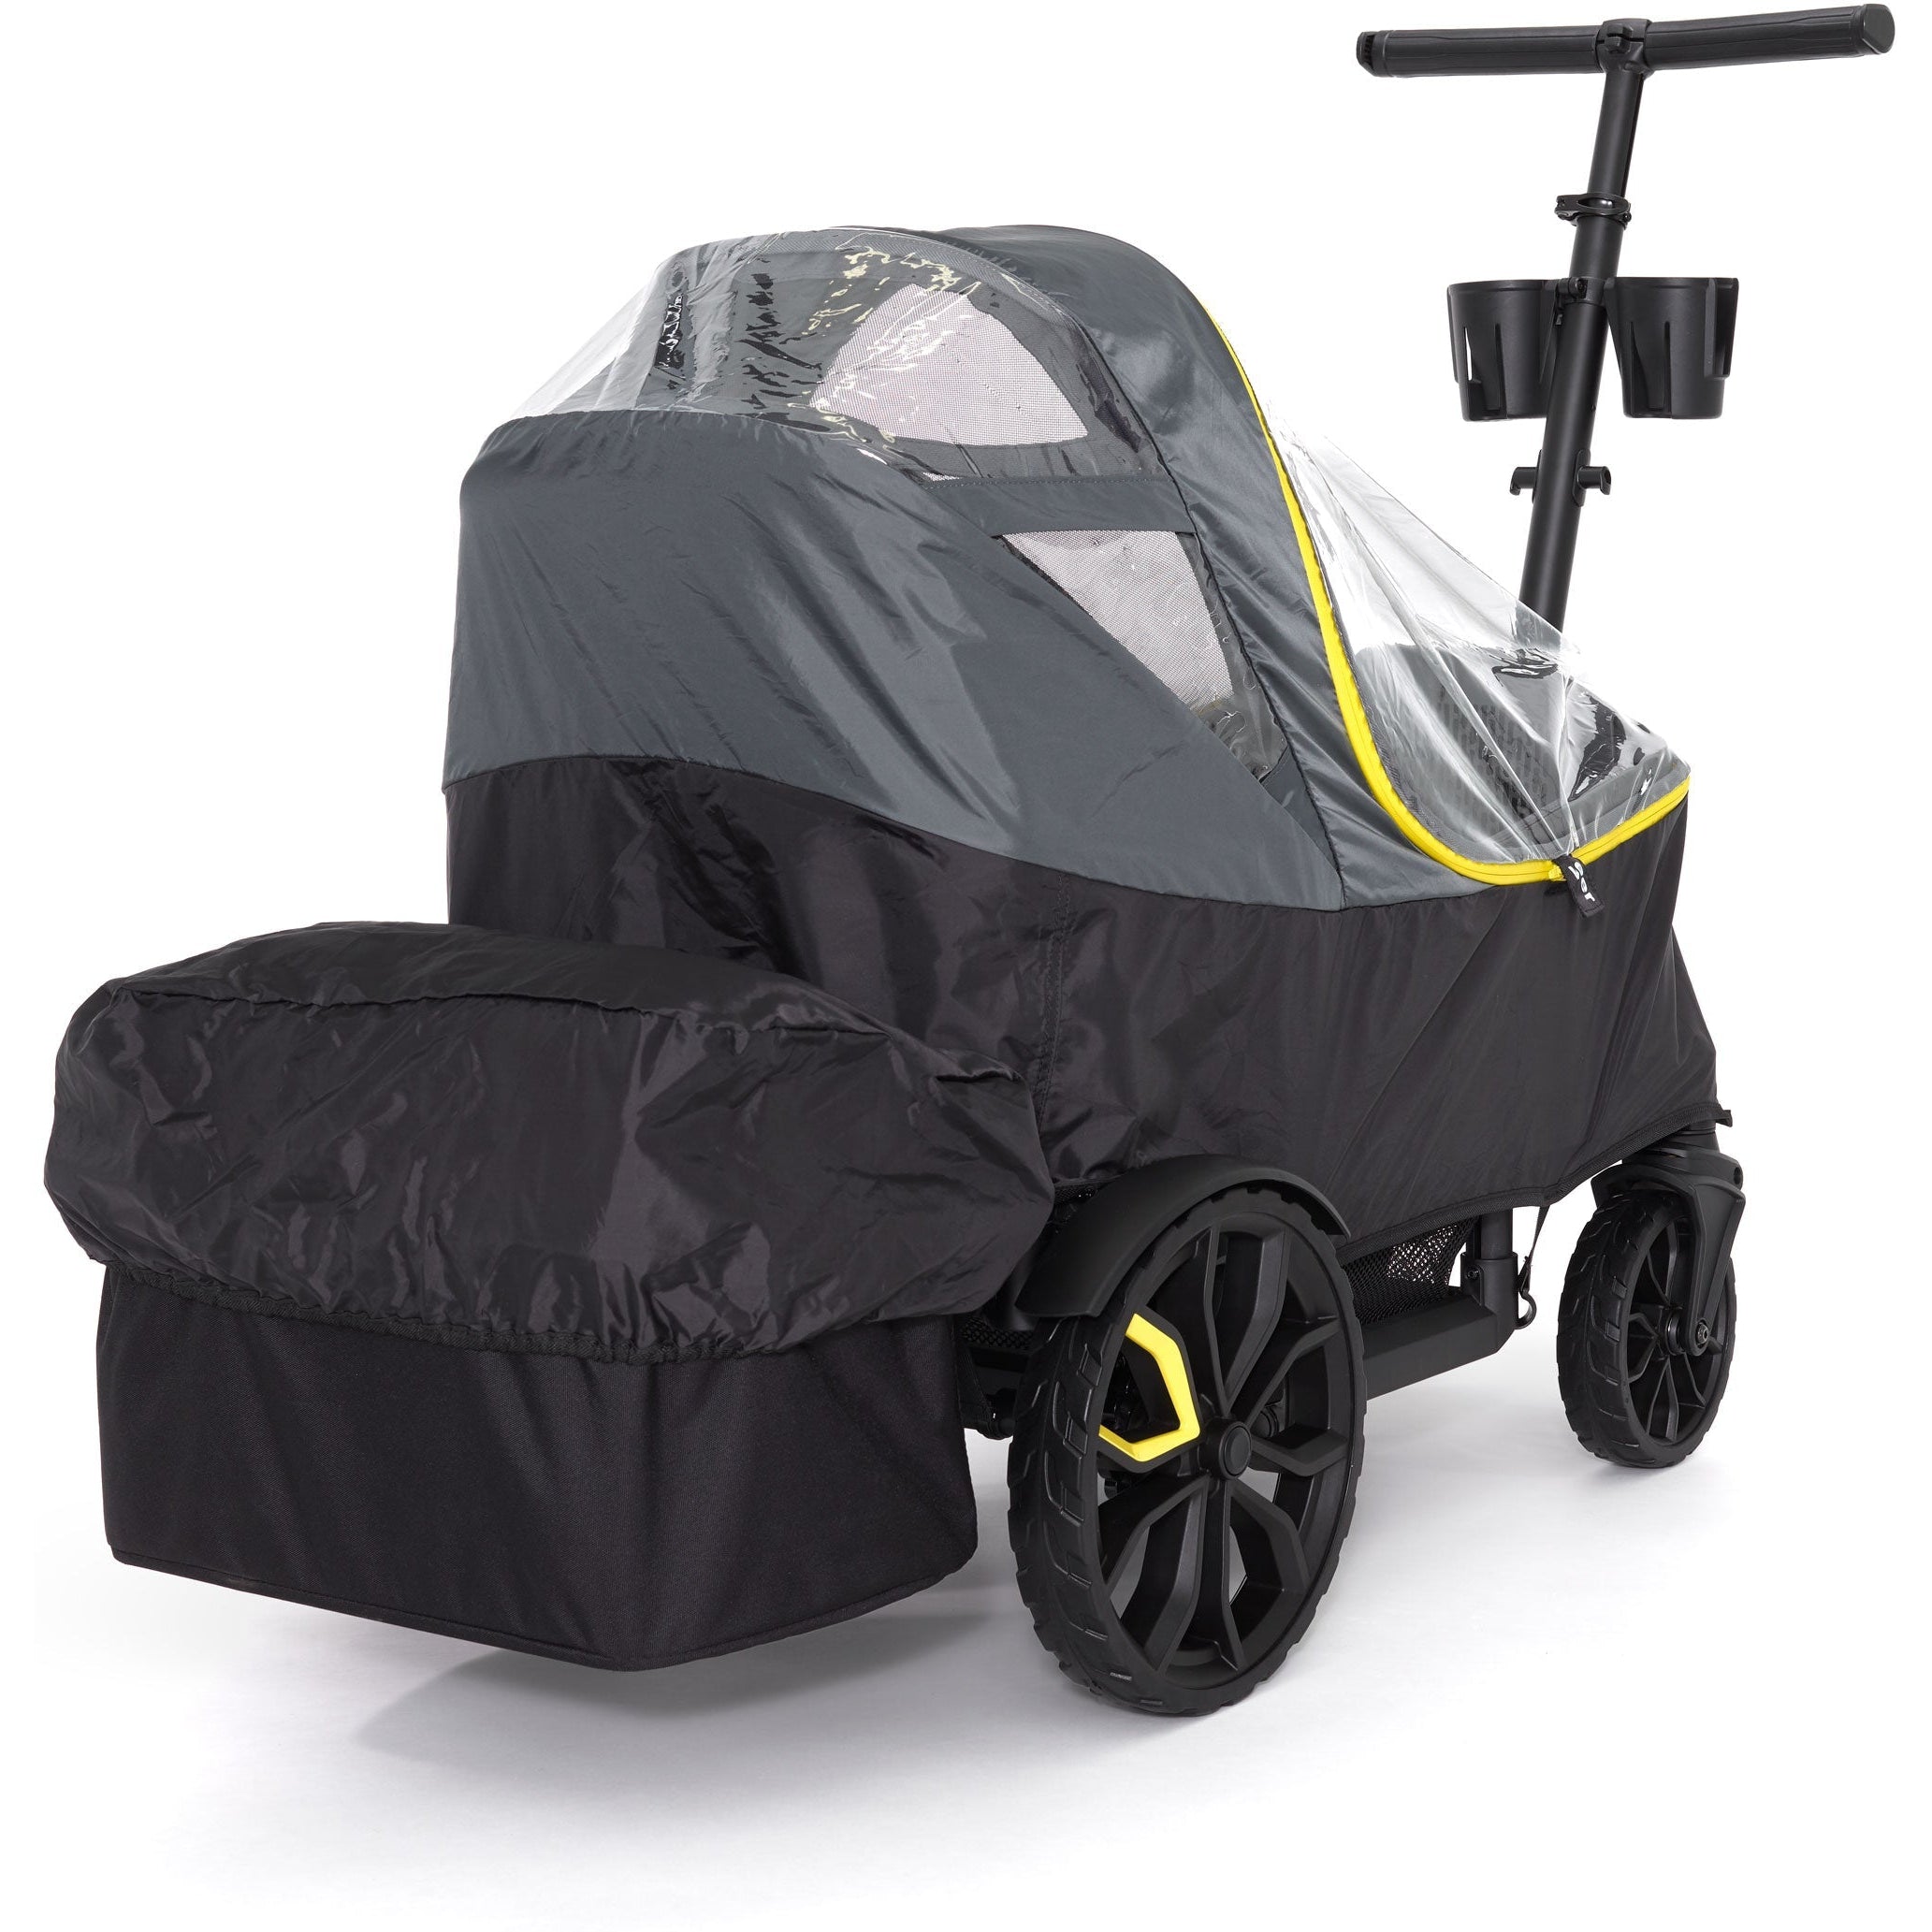 Veer Cruiser XL All-Weather Cover